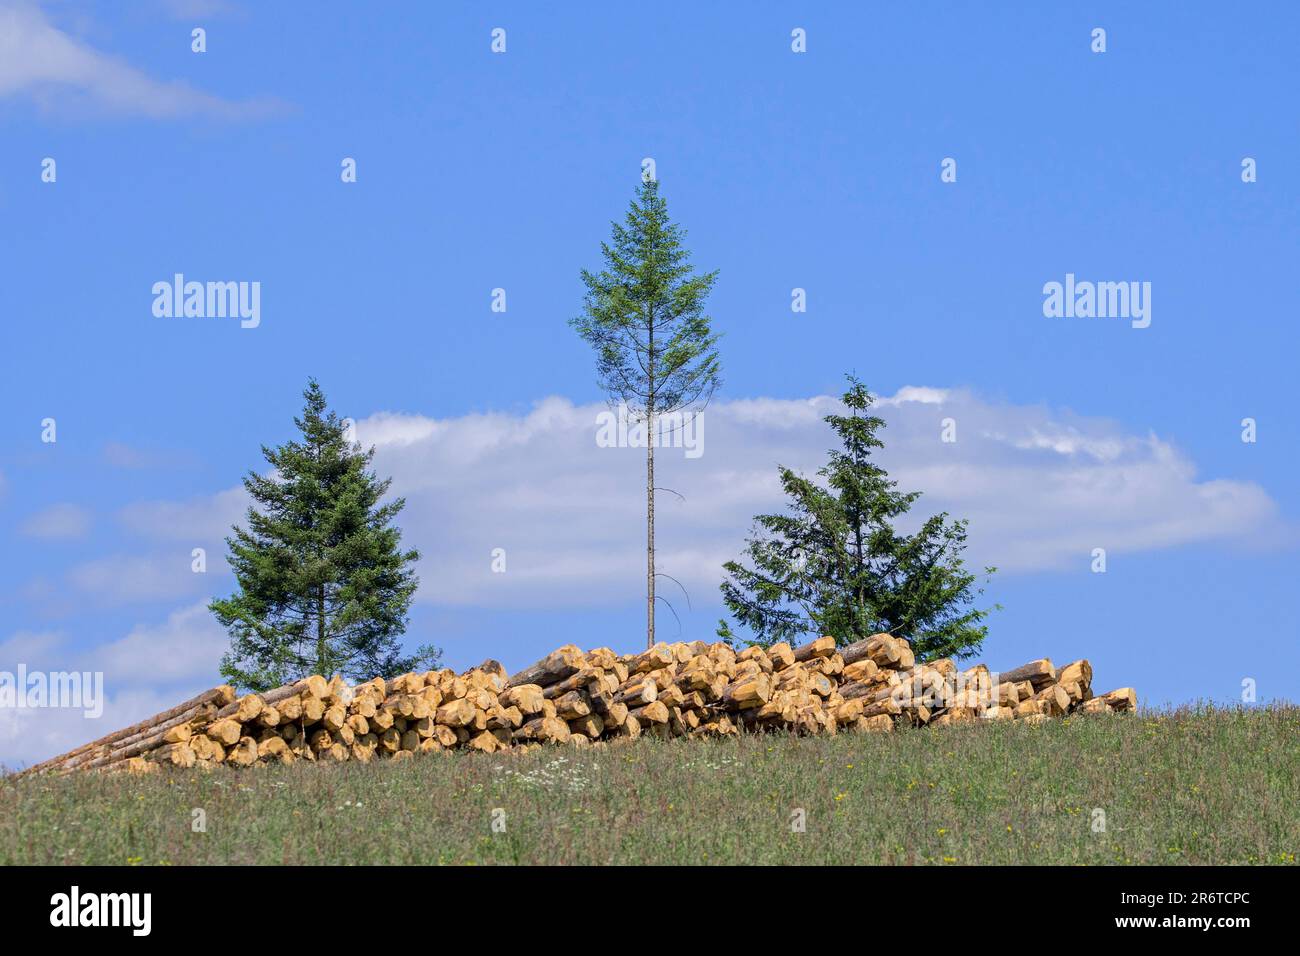 Deforestation showing huge wood pile of tree trunks in coniferous clearcut forest with a few remaining pine trees, Vlessart, Belgian Ardennes, Belgium Stock Photo